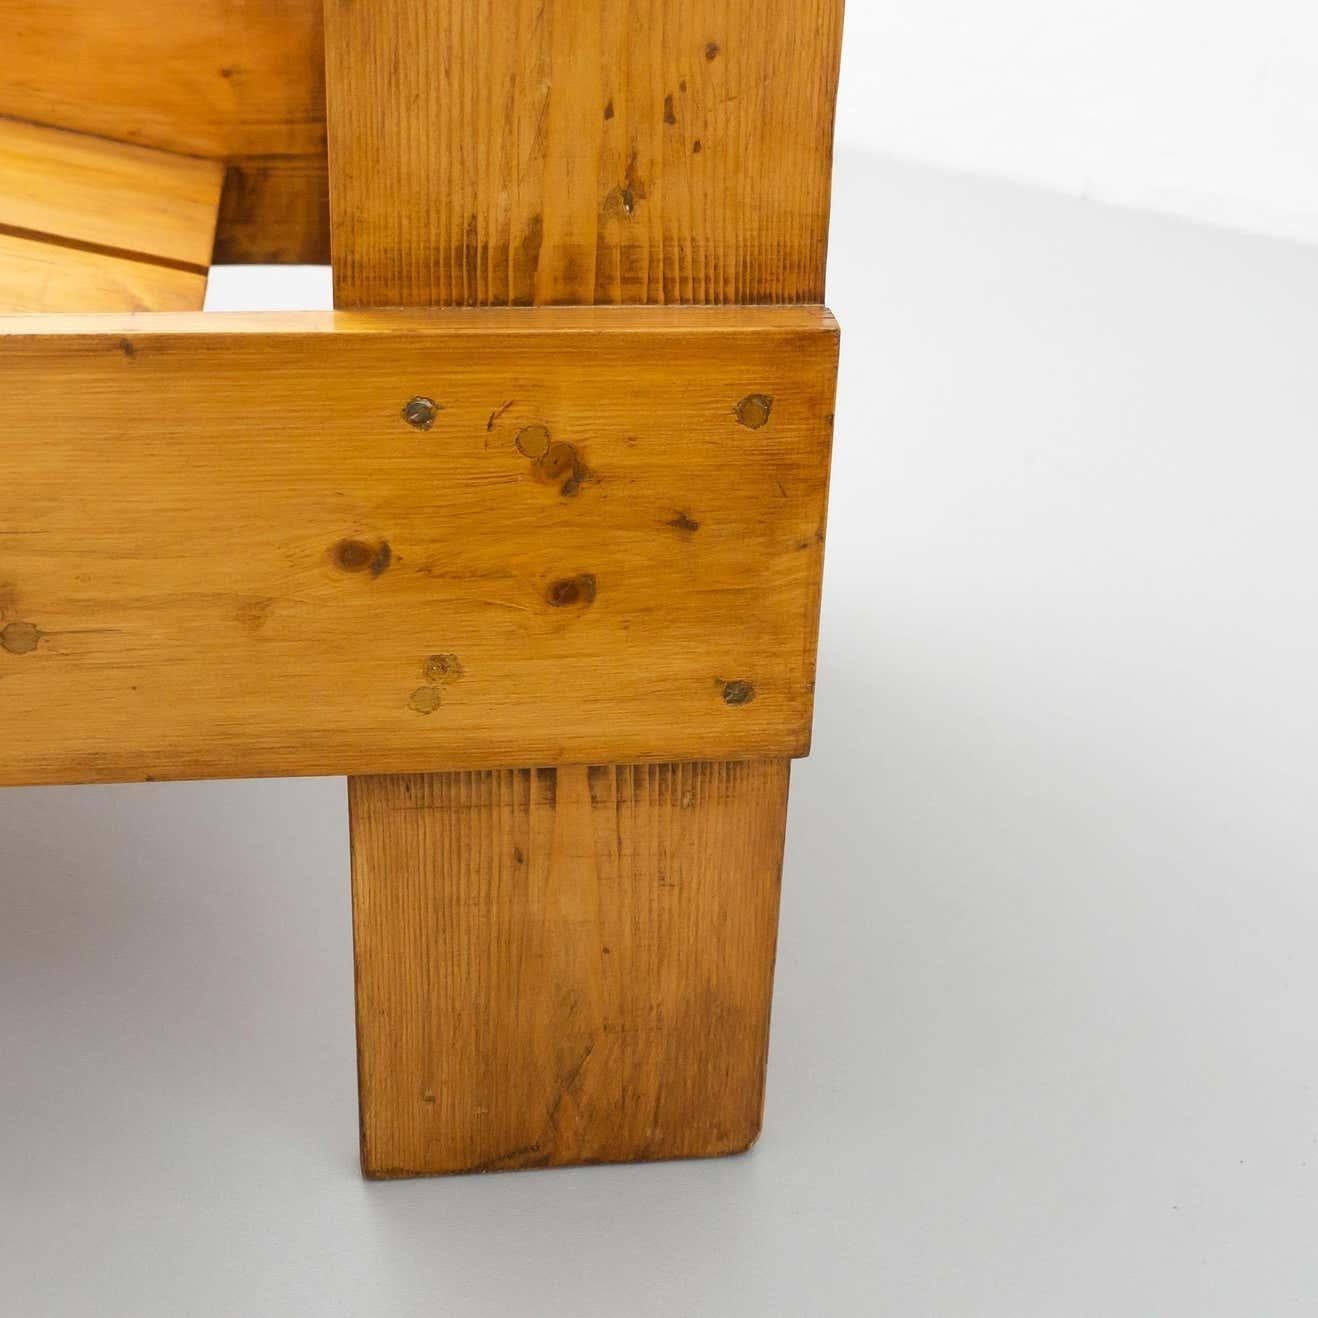 Gerrit Rietveld Mid-Century Modern Wood Crate Chair, circa 1950 For Sale 10